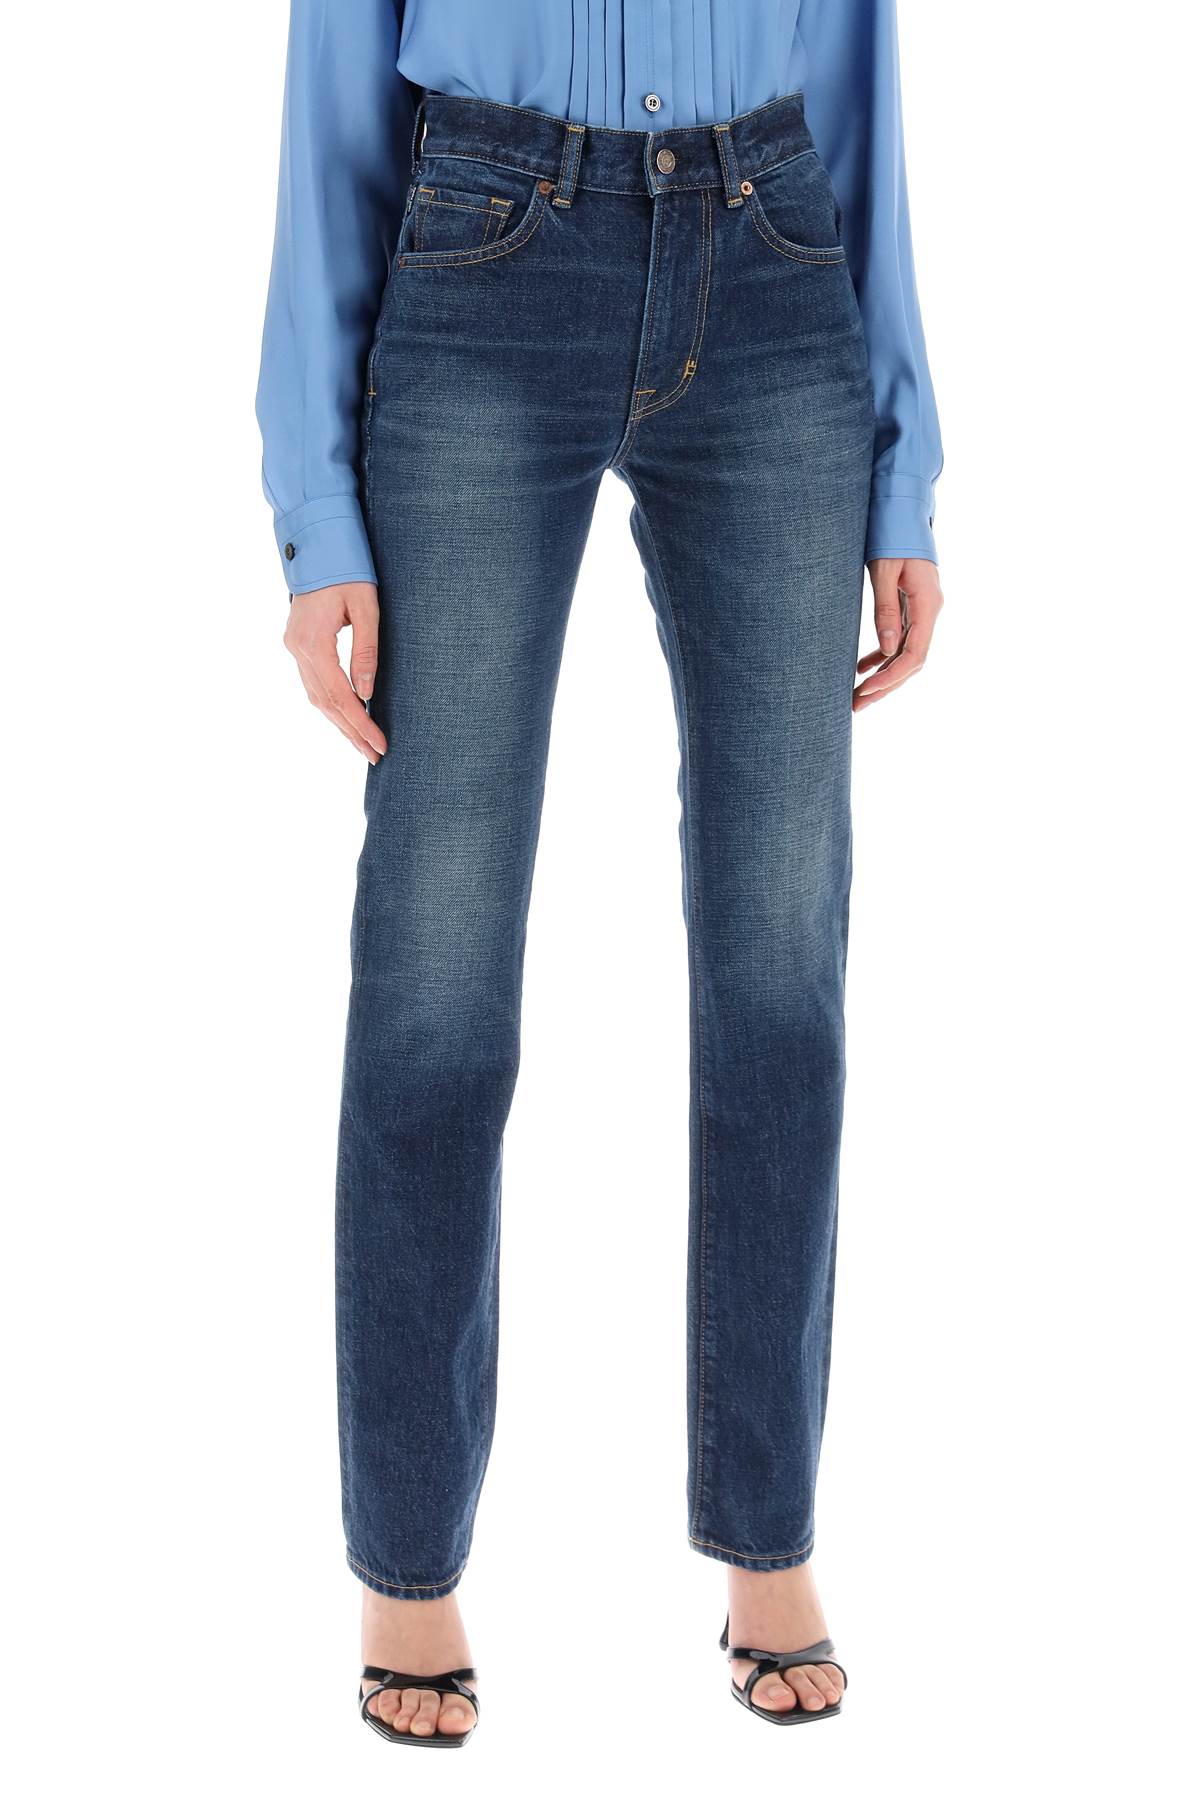 Tom ford "jeans with stone wash treatment-1